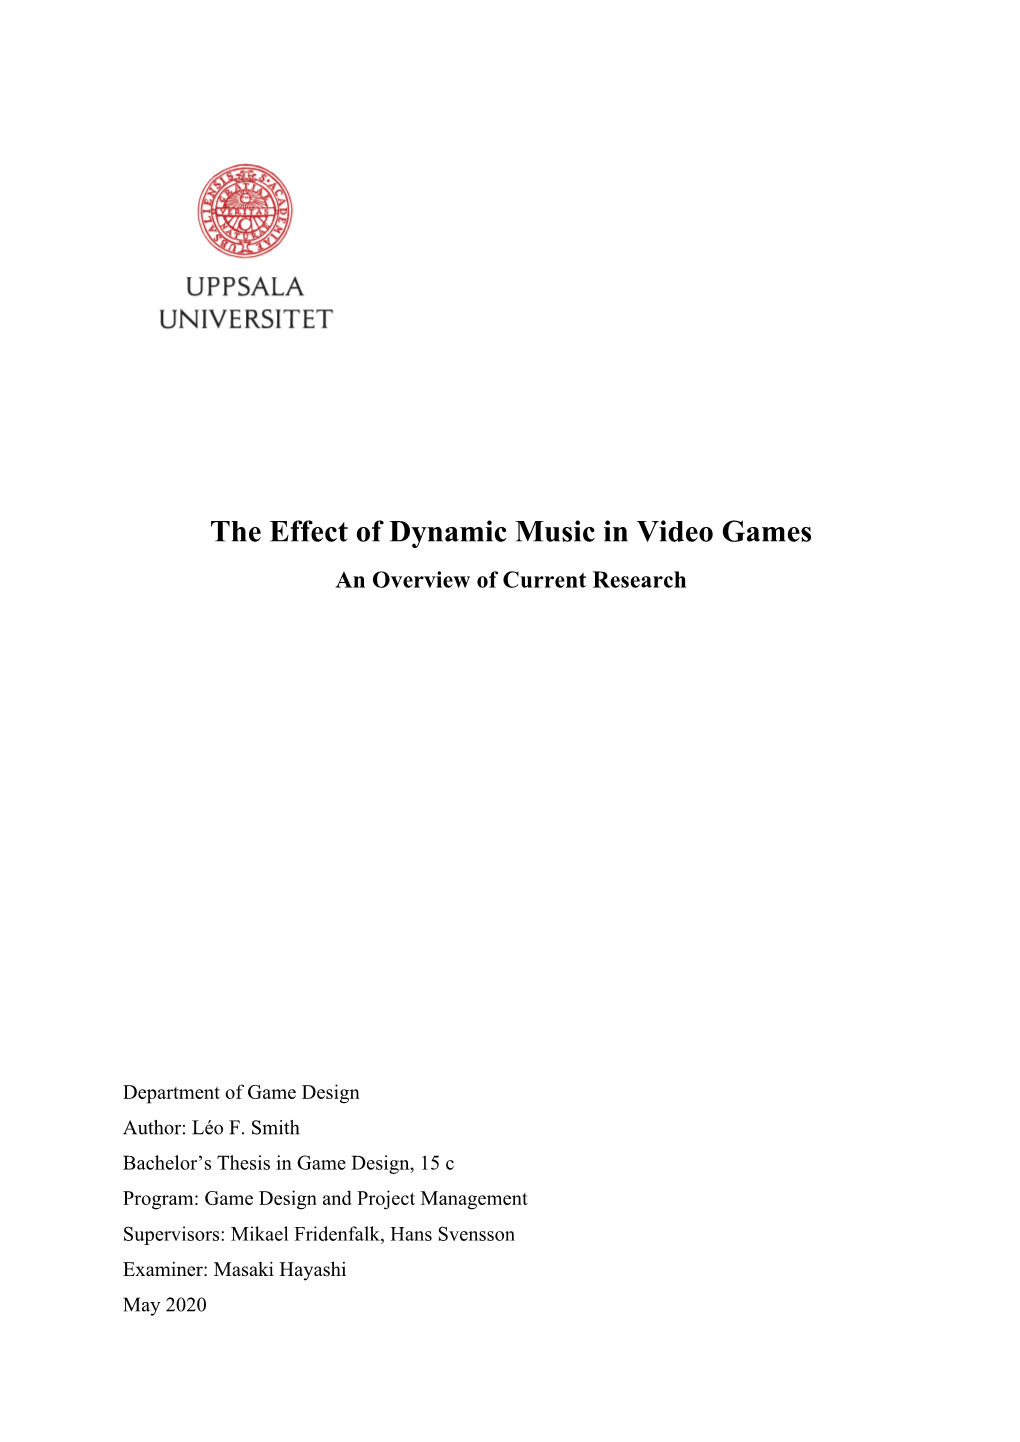 The Effect of Dynamic Music in Video Games an Overview of Current Research